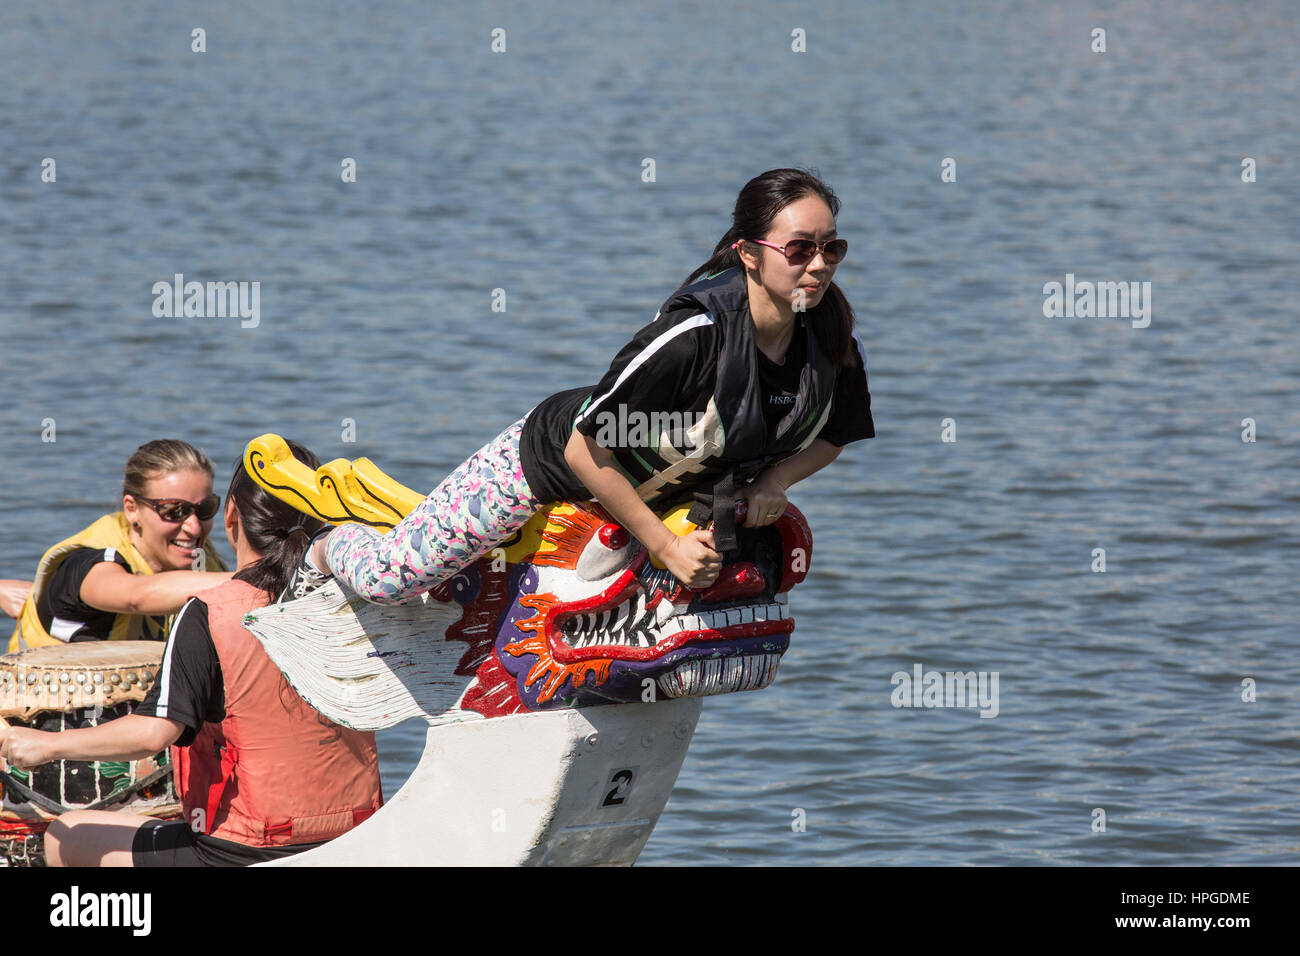 Woman preparing to grab a flag to signal winning a dragon boat race Stock Photo